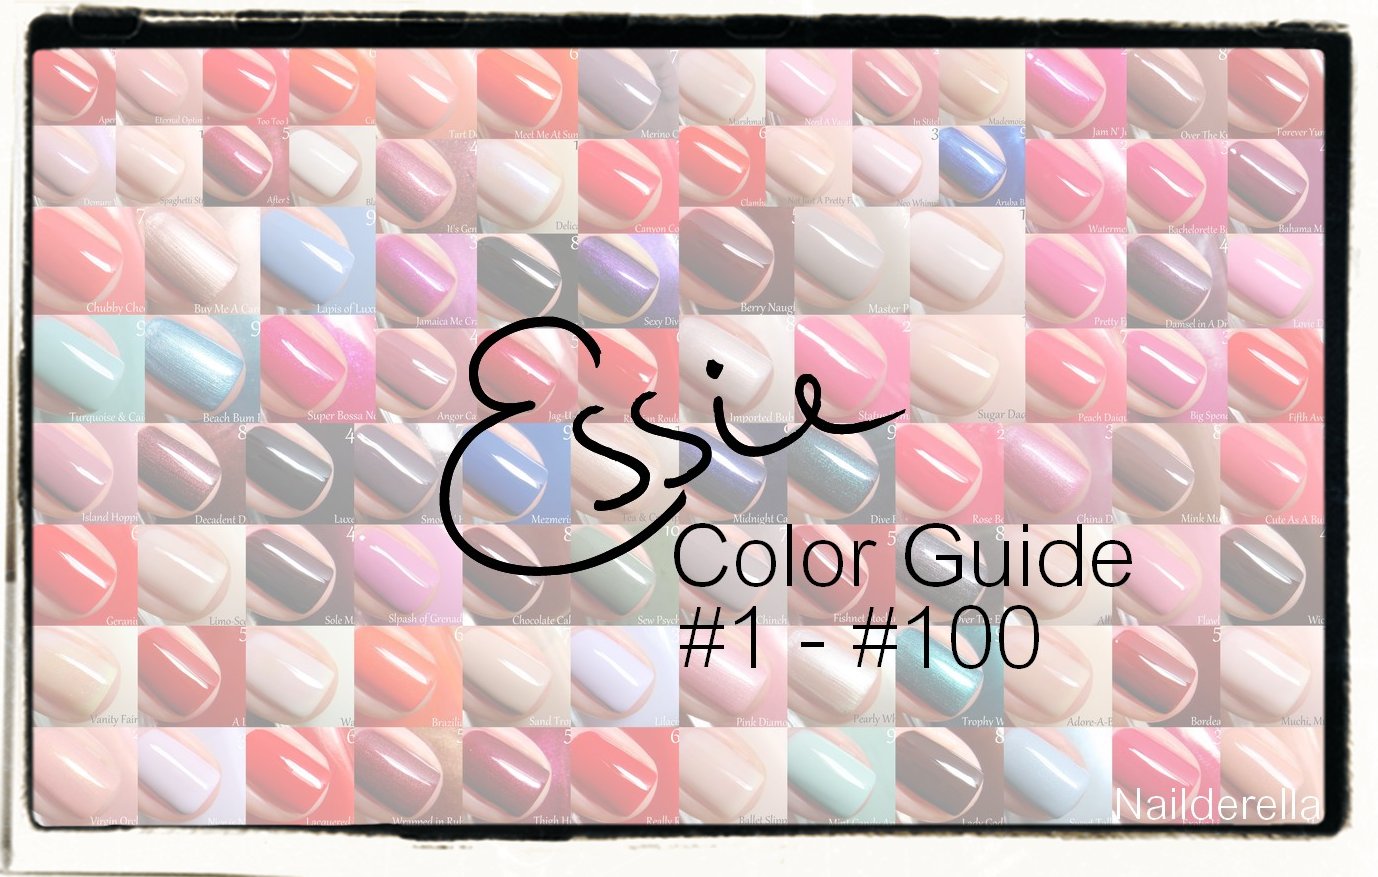 Essie Nail Polish Color Chart on Hand - wide 7